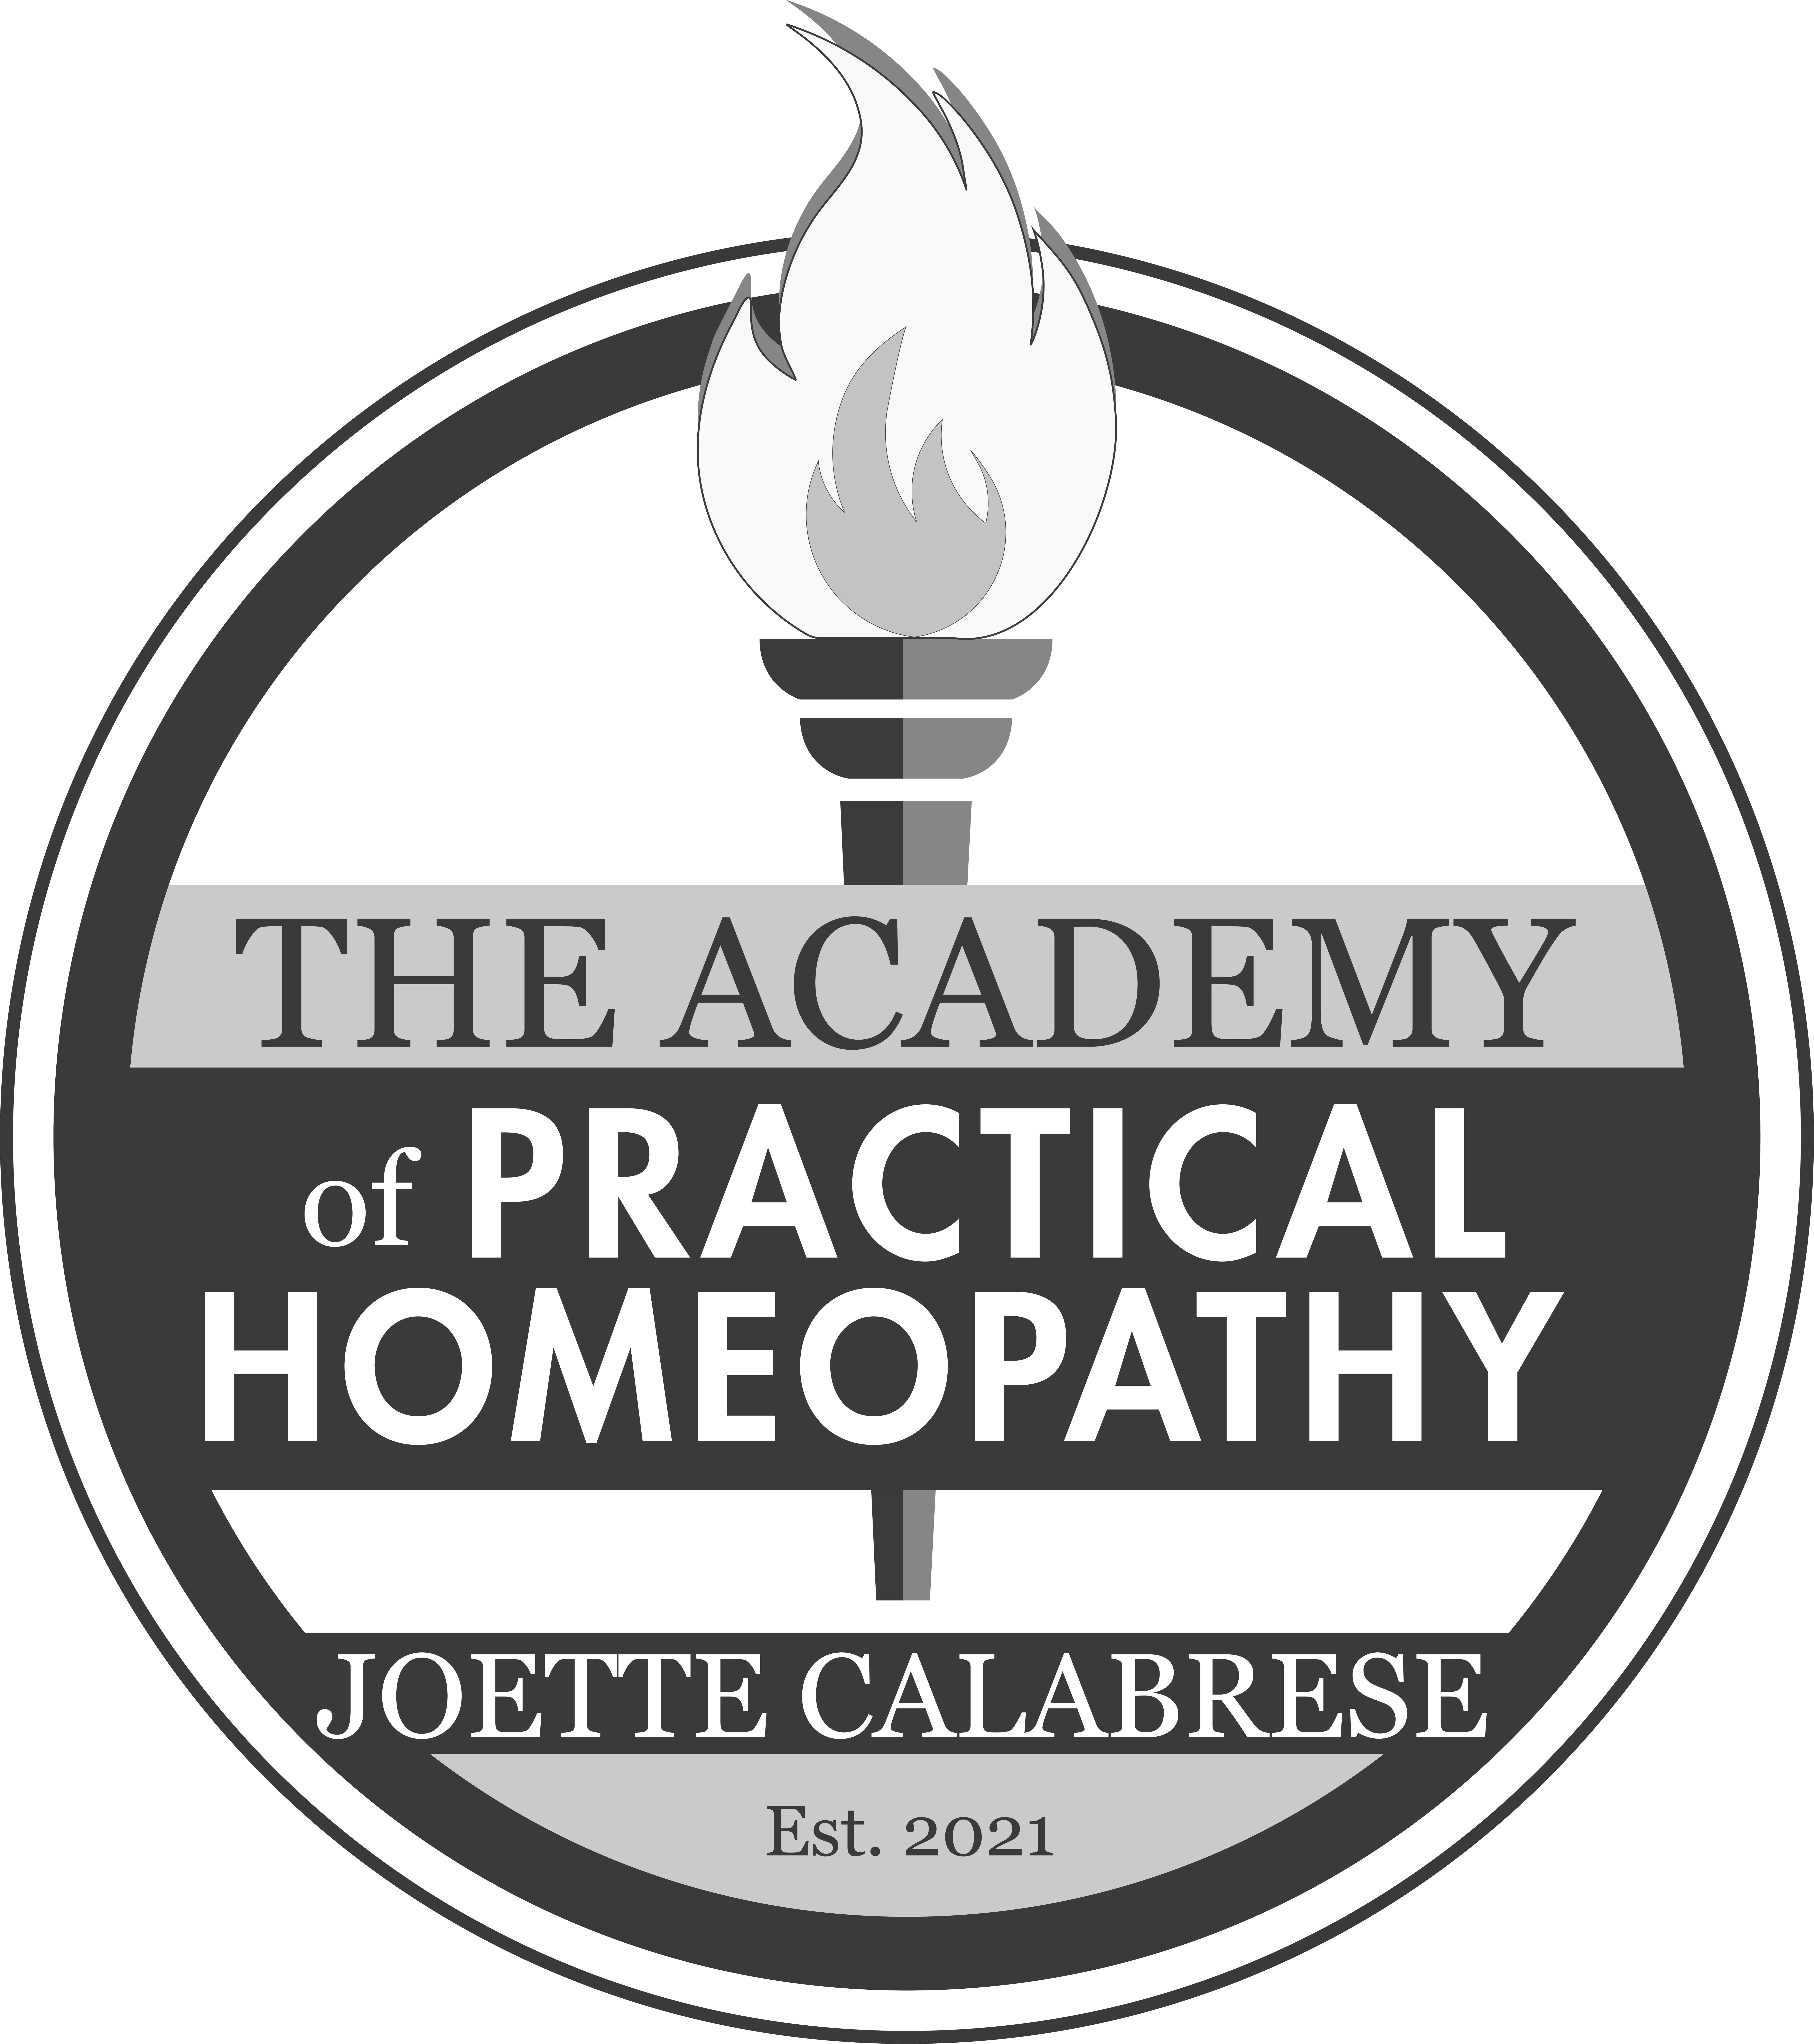 THE ACADEMY OF PRACTICAL HOMEOPATHY JOETTE CALABRESE EST. 2021